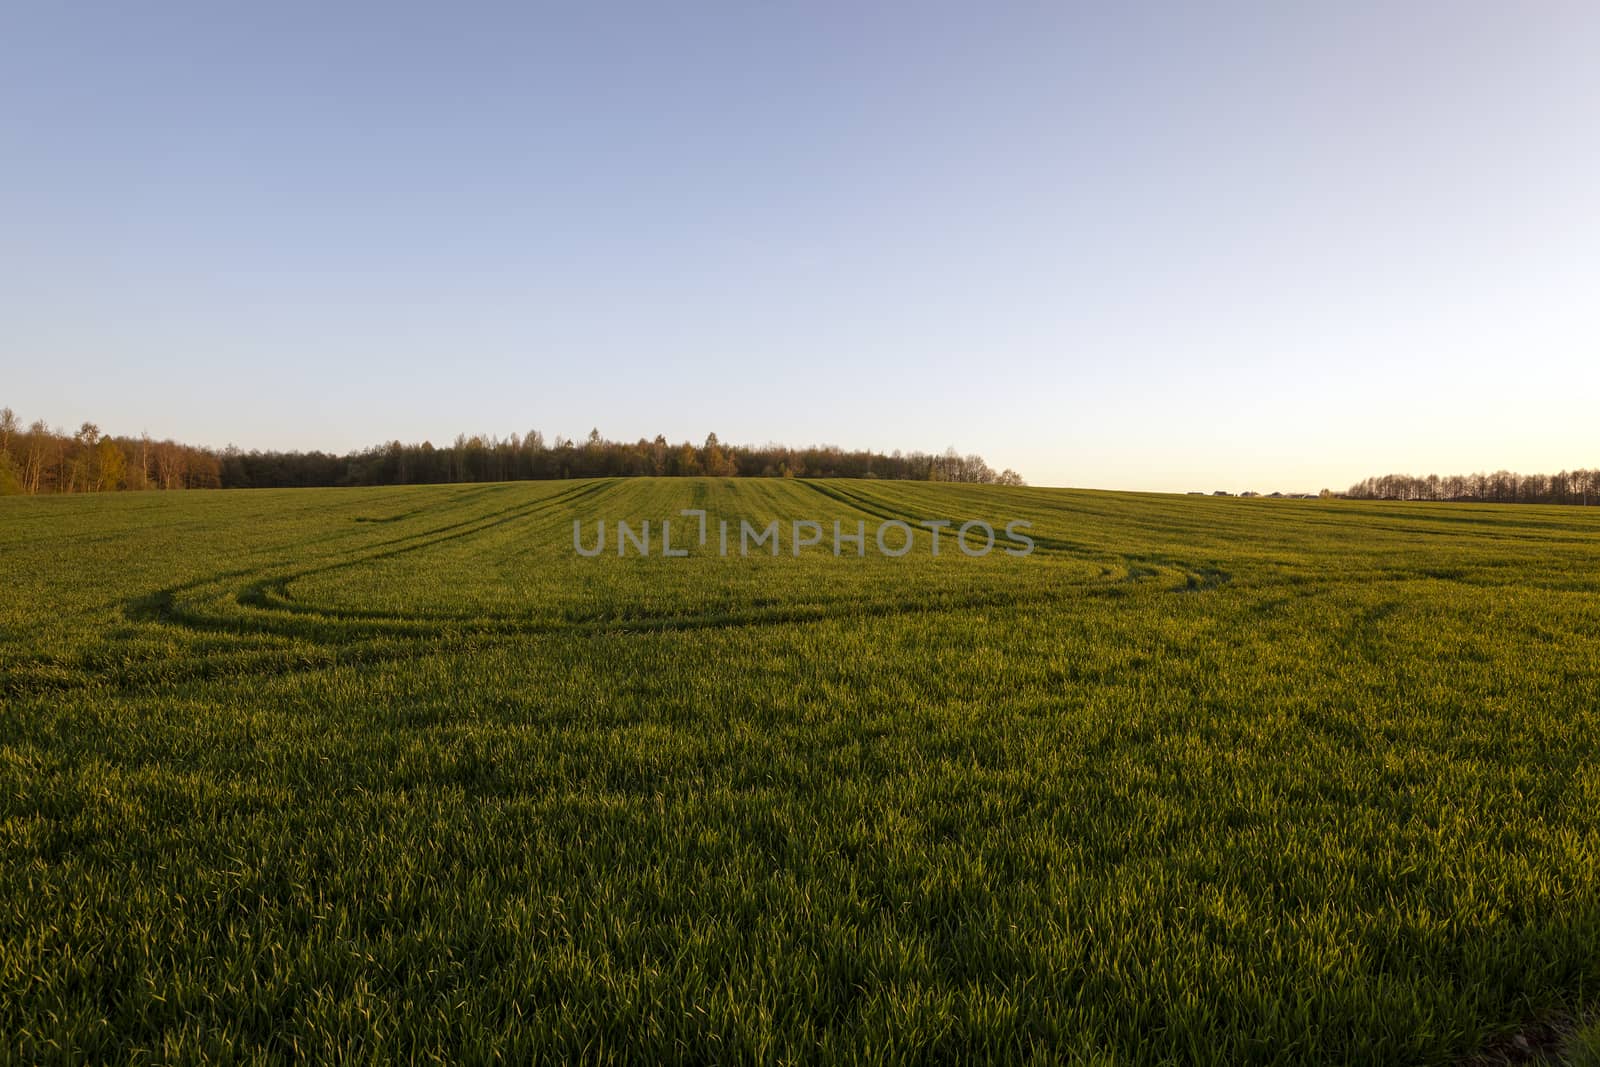   an agricultural field on which young cereals grow. time - a sunset